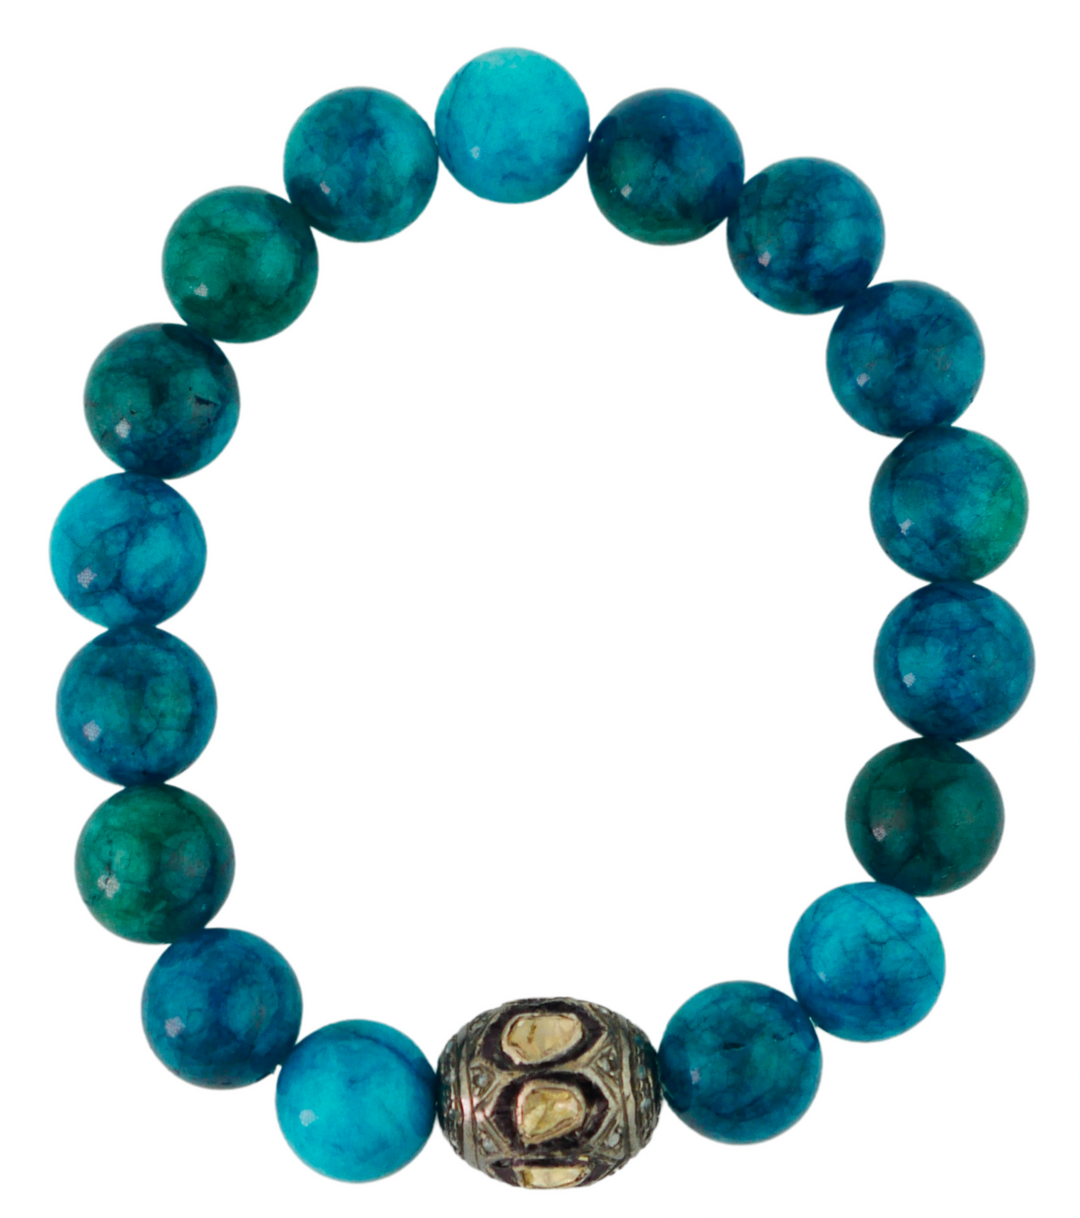 Blue Agate Beads With Rough Cut Diamond Rondelle